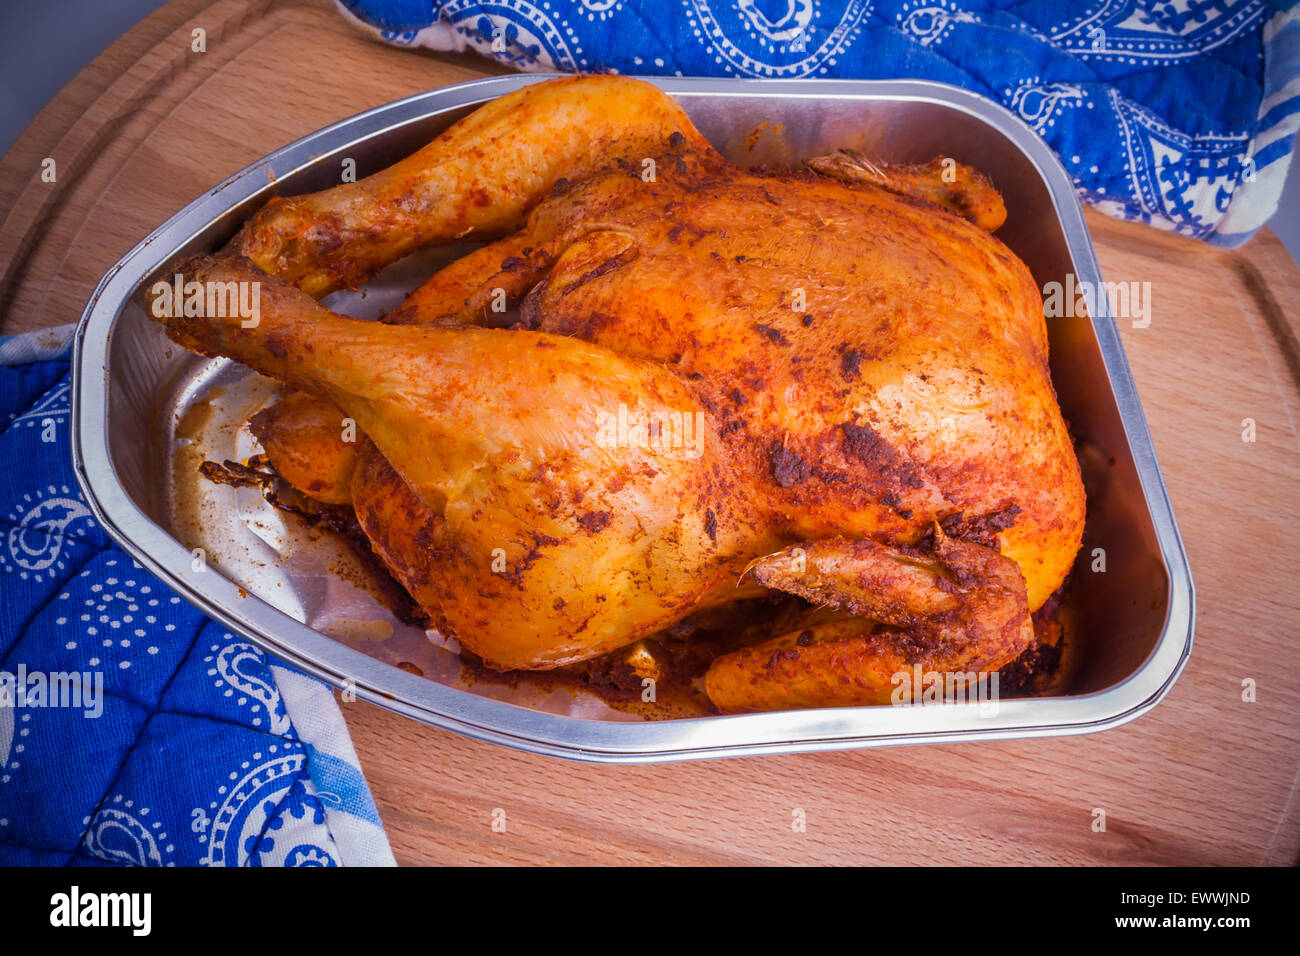 Baked fried chicken in aluminum dish, top view Stock Photo